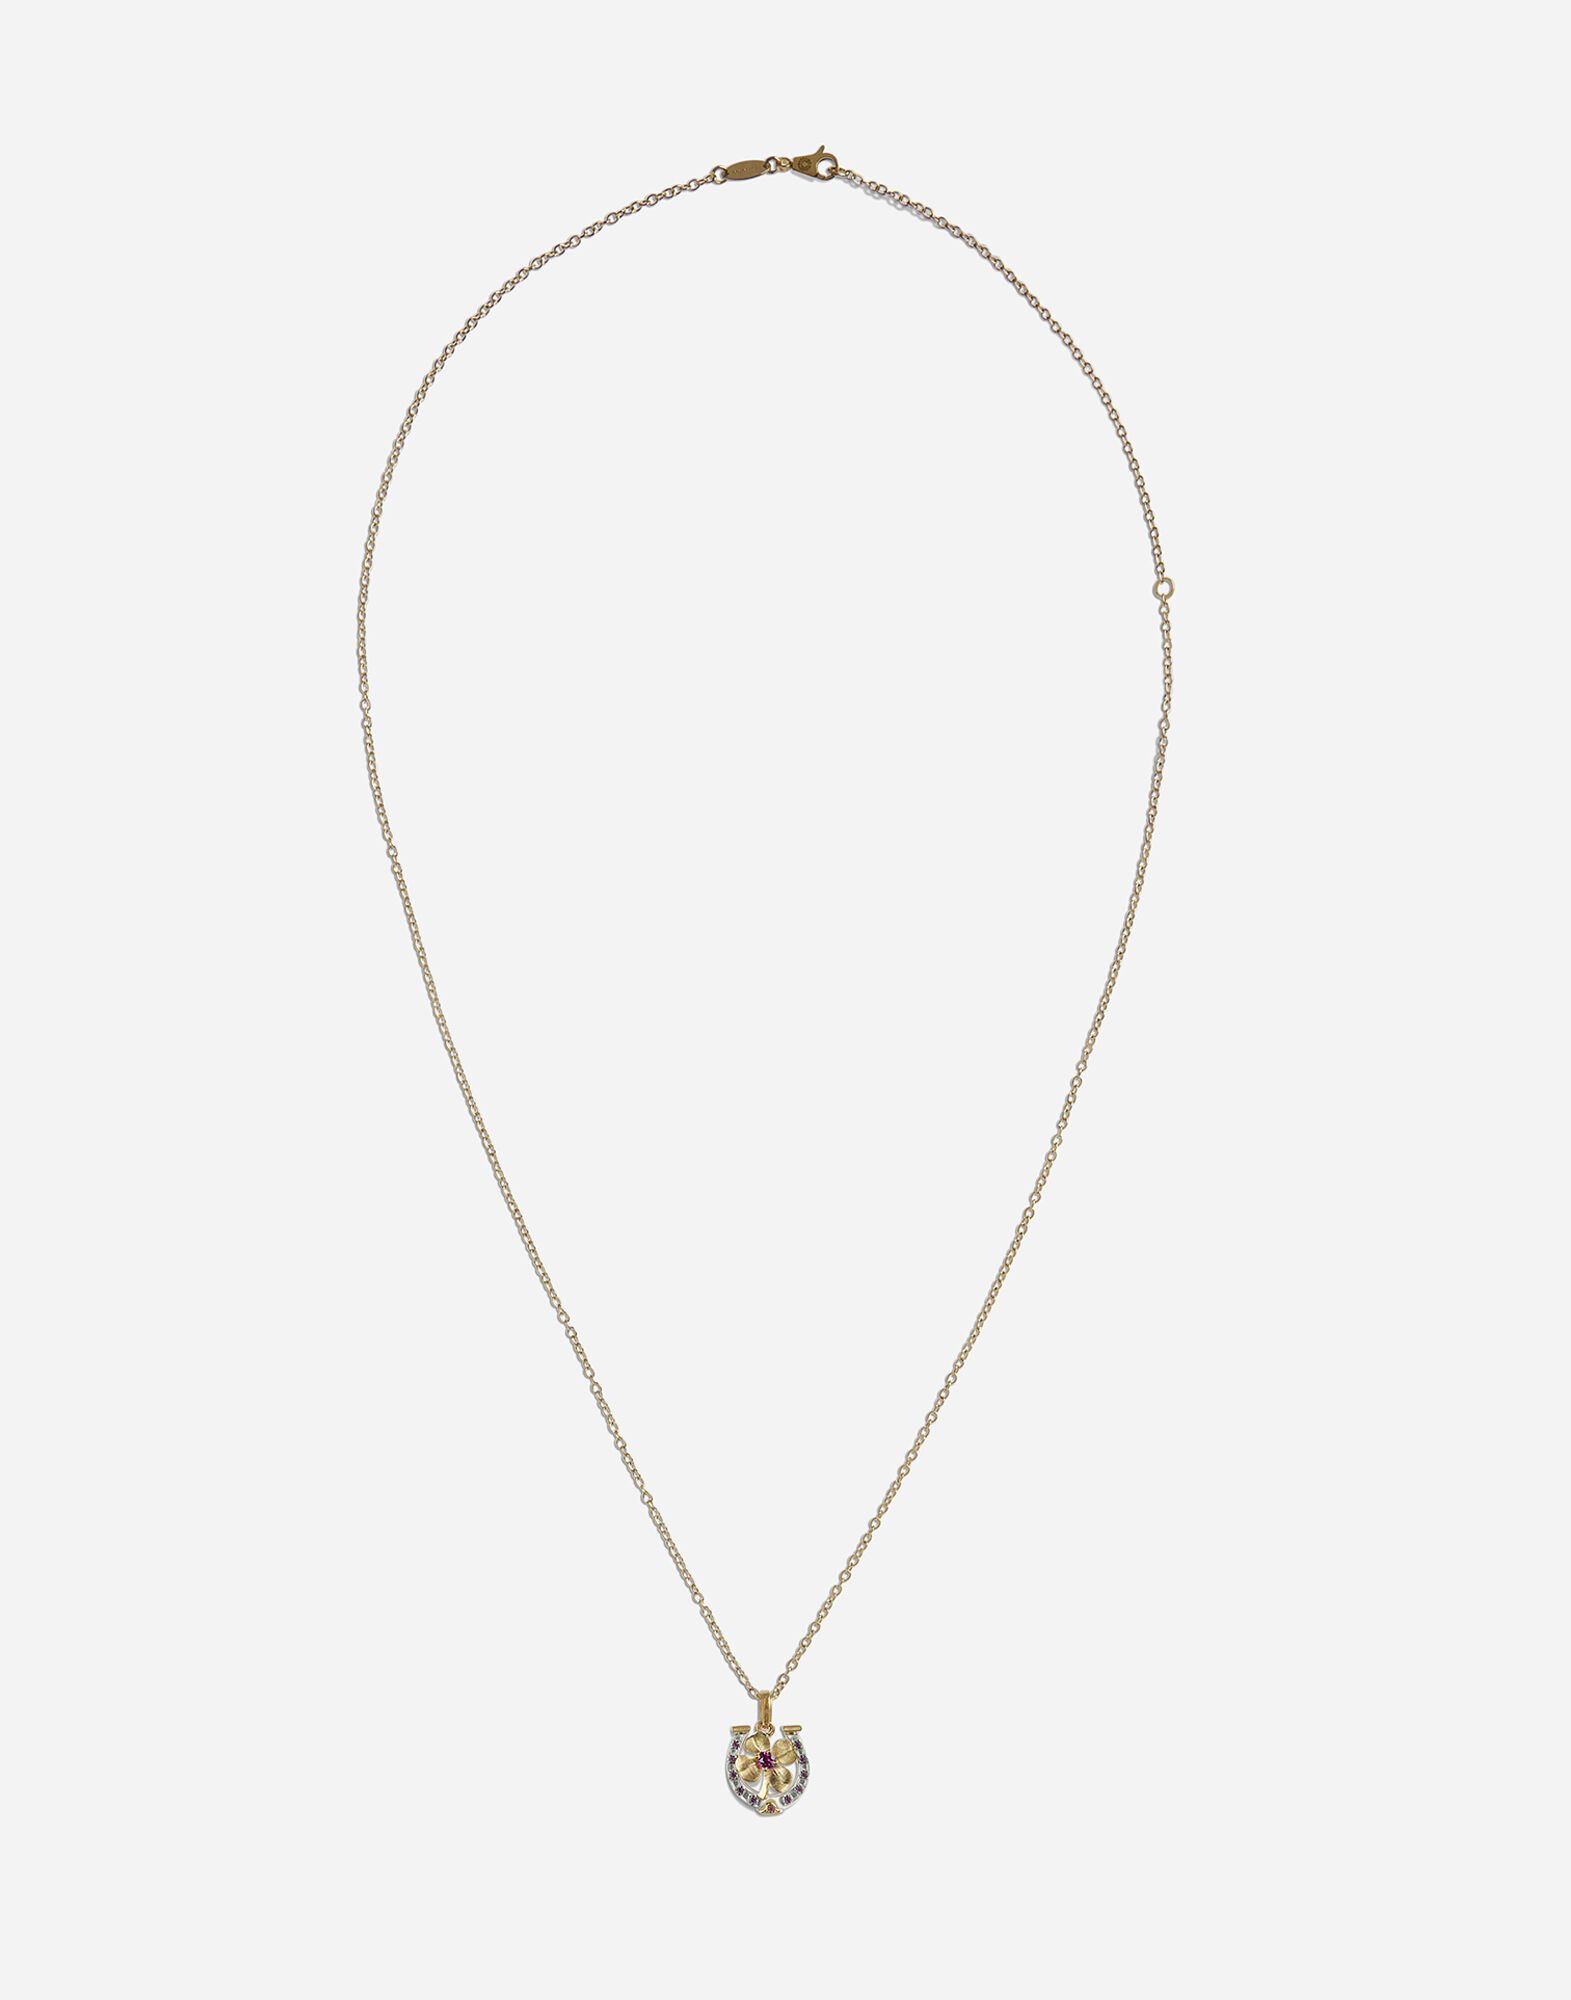 Dolce & Gabbana Necklace with good luck charm Yellow gold WAKK1GWIE01